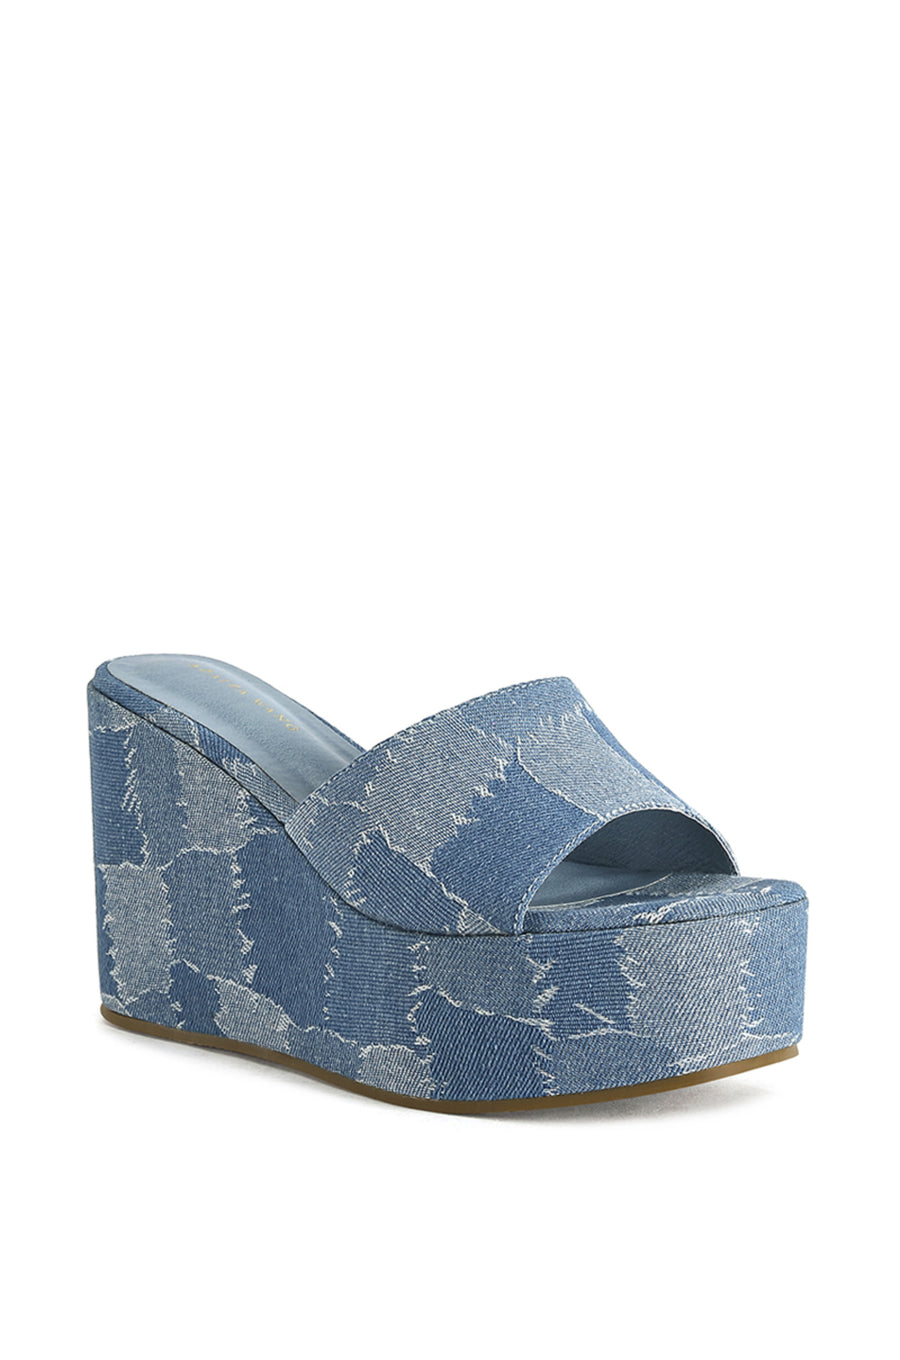 platform statement sandals with a patchwork denim design on the sole and foot strap